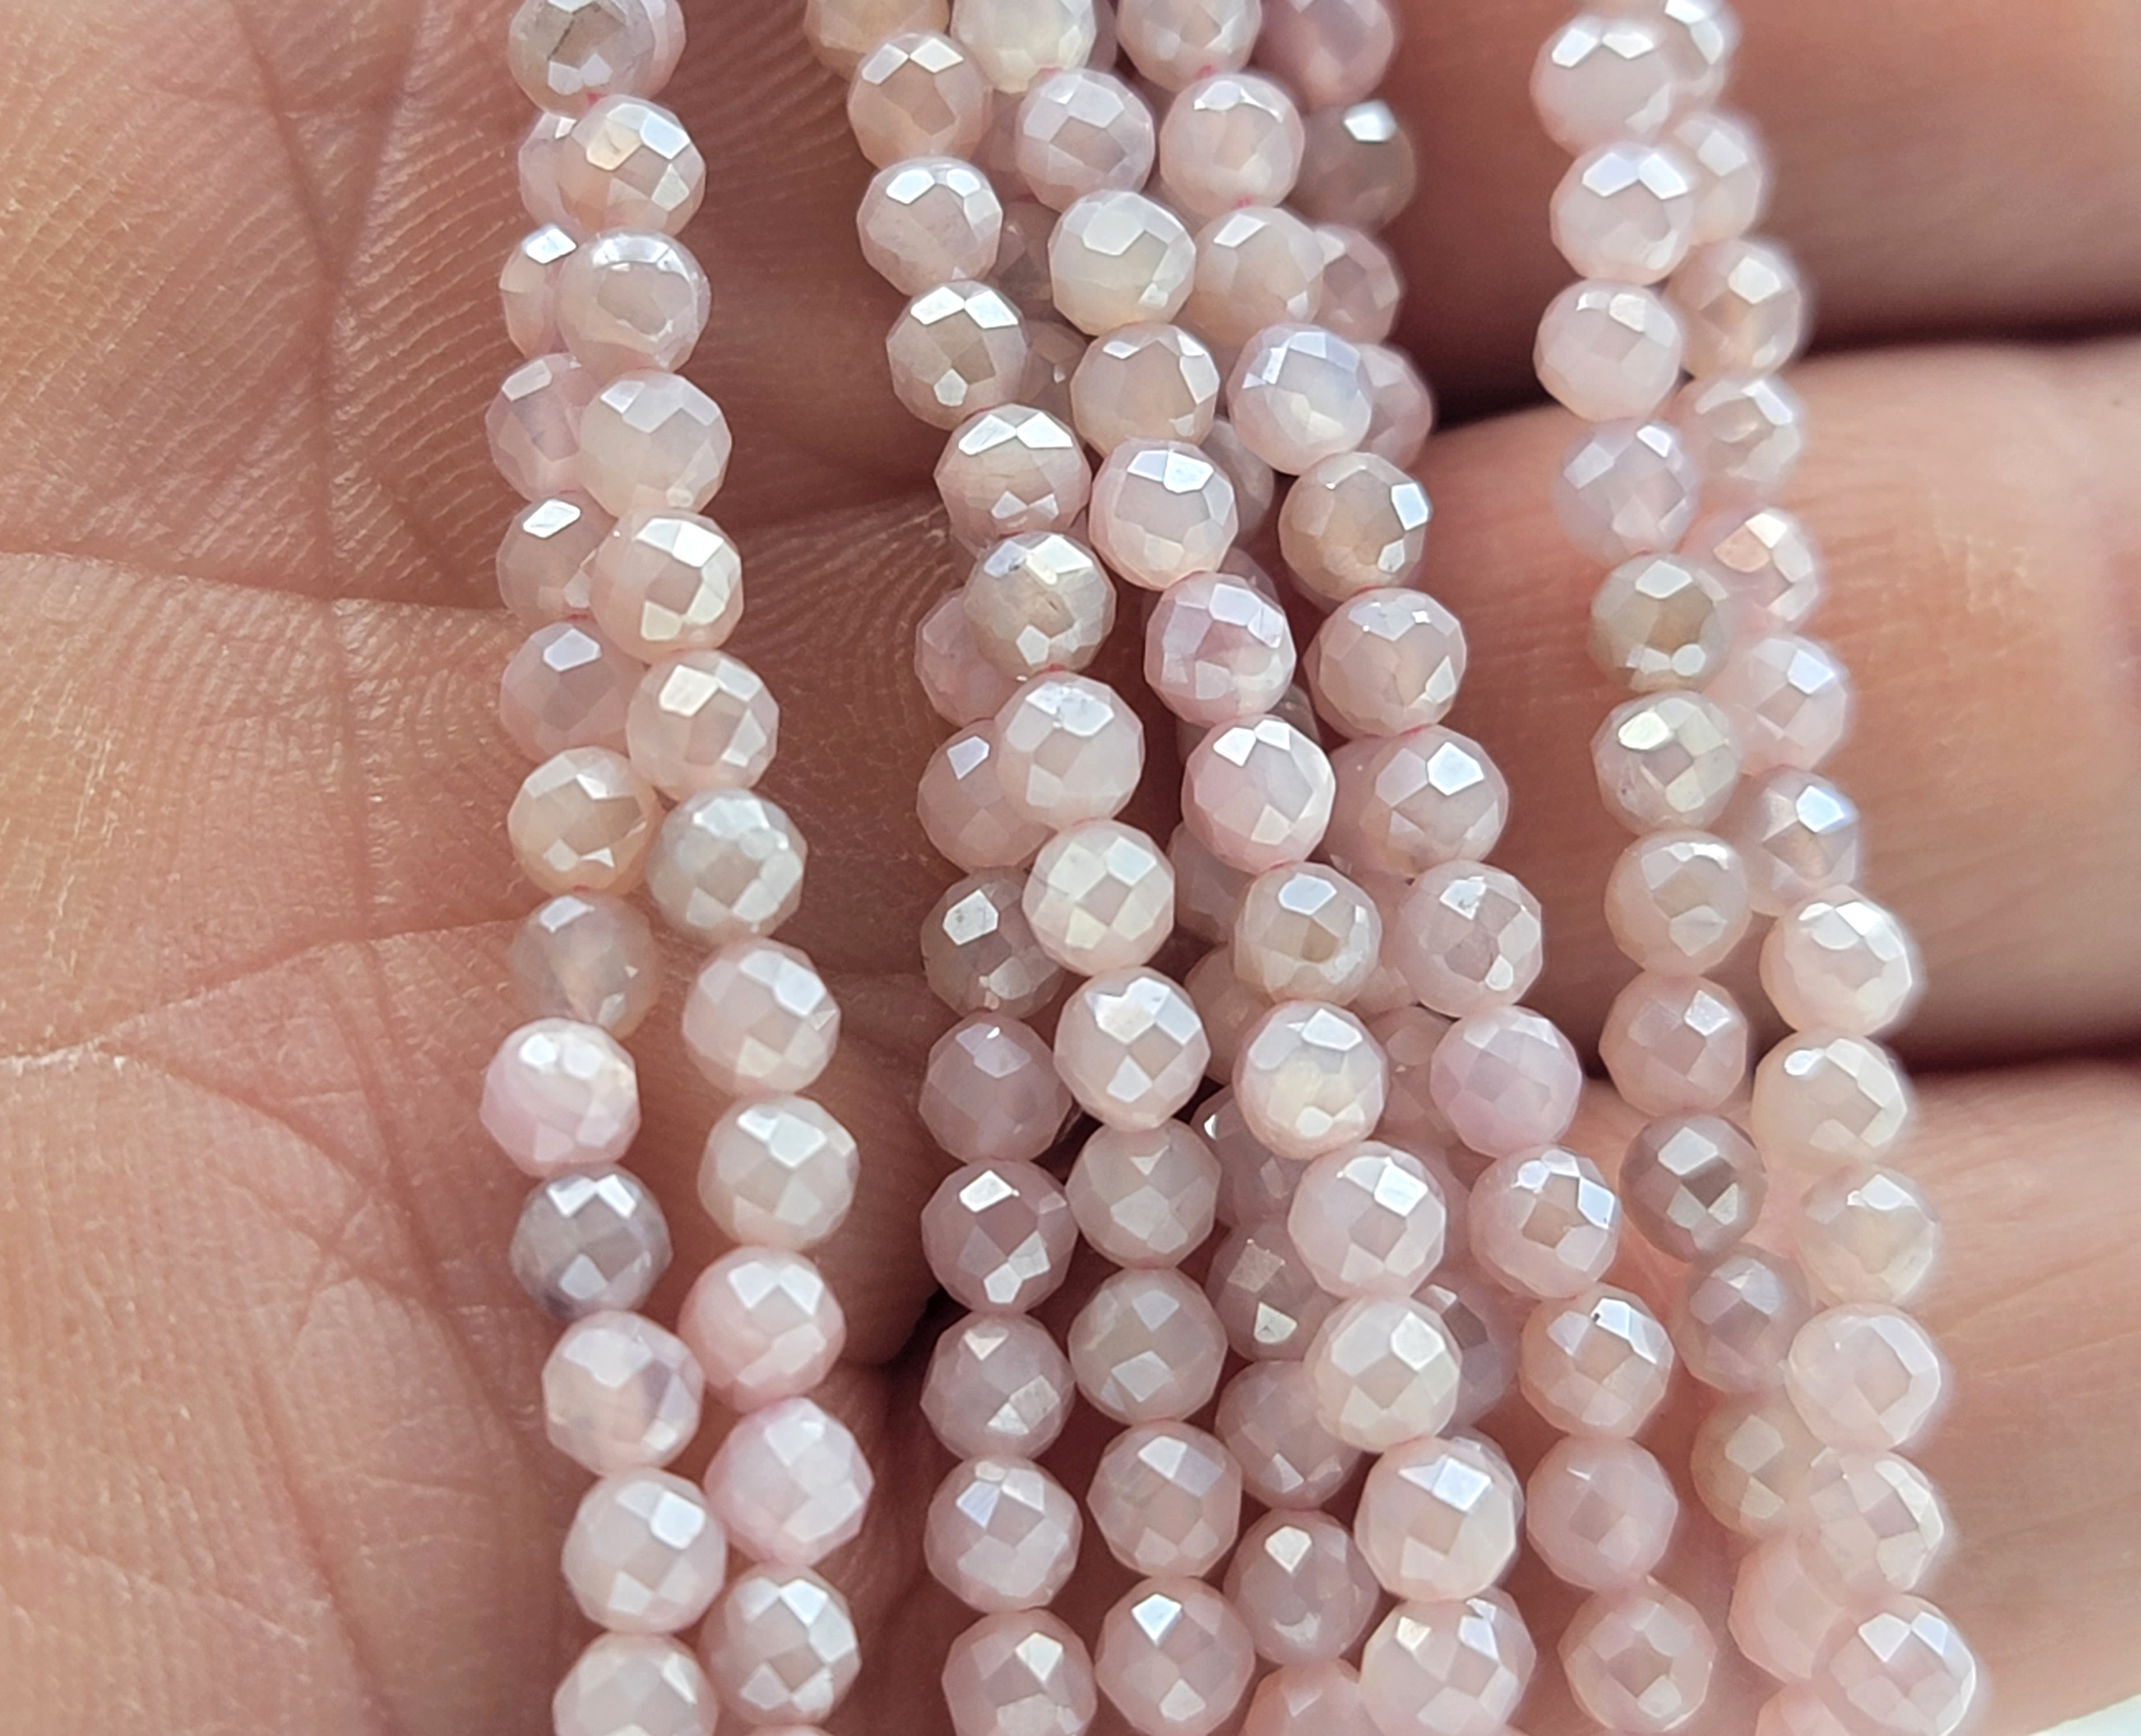 Full strand High Quality AAA grade beads with nice color variations. 6mm round beads on 15 inch strand Multi-Moonstone Gemstone Beads